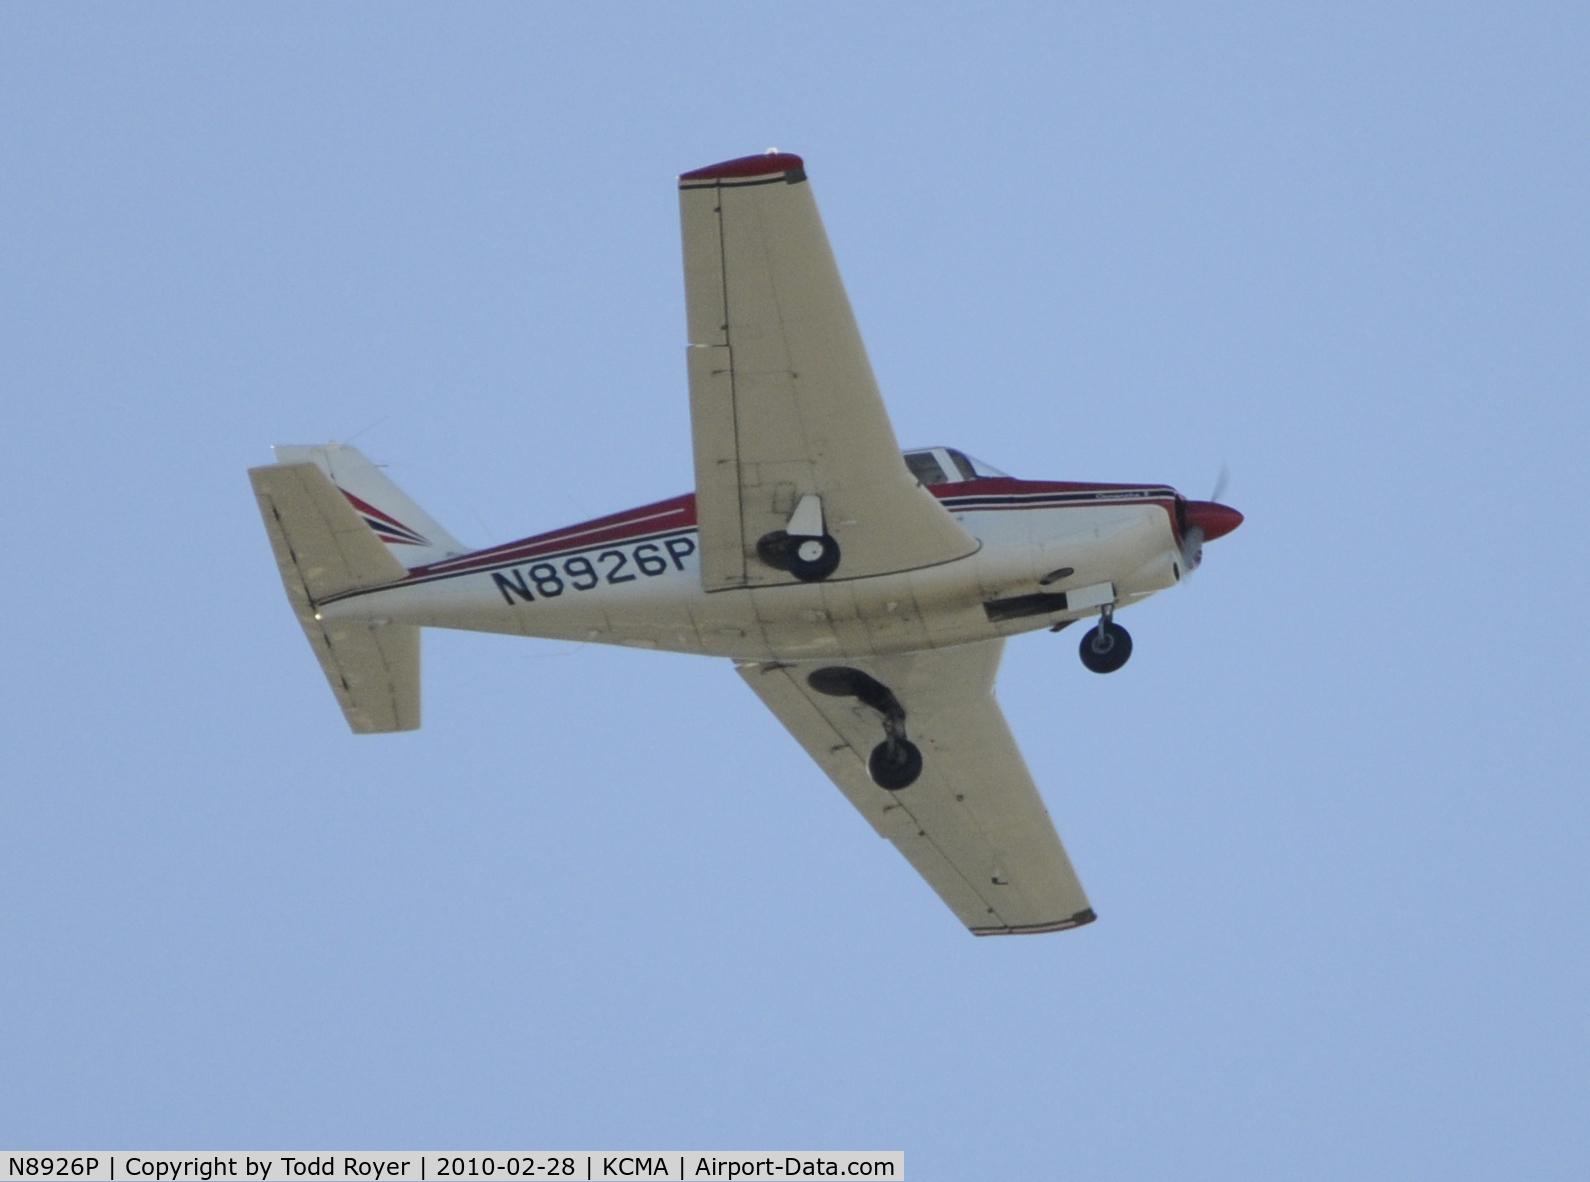 N8926P, Piper PA-24-260 Comanche C/N 24-4382, From the backyard